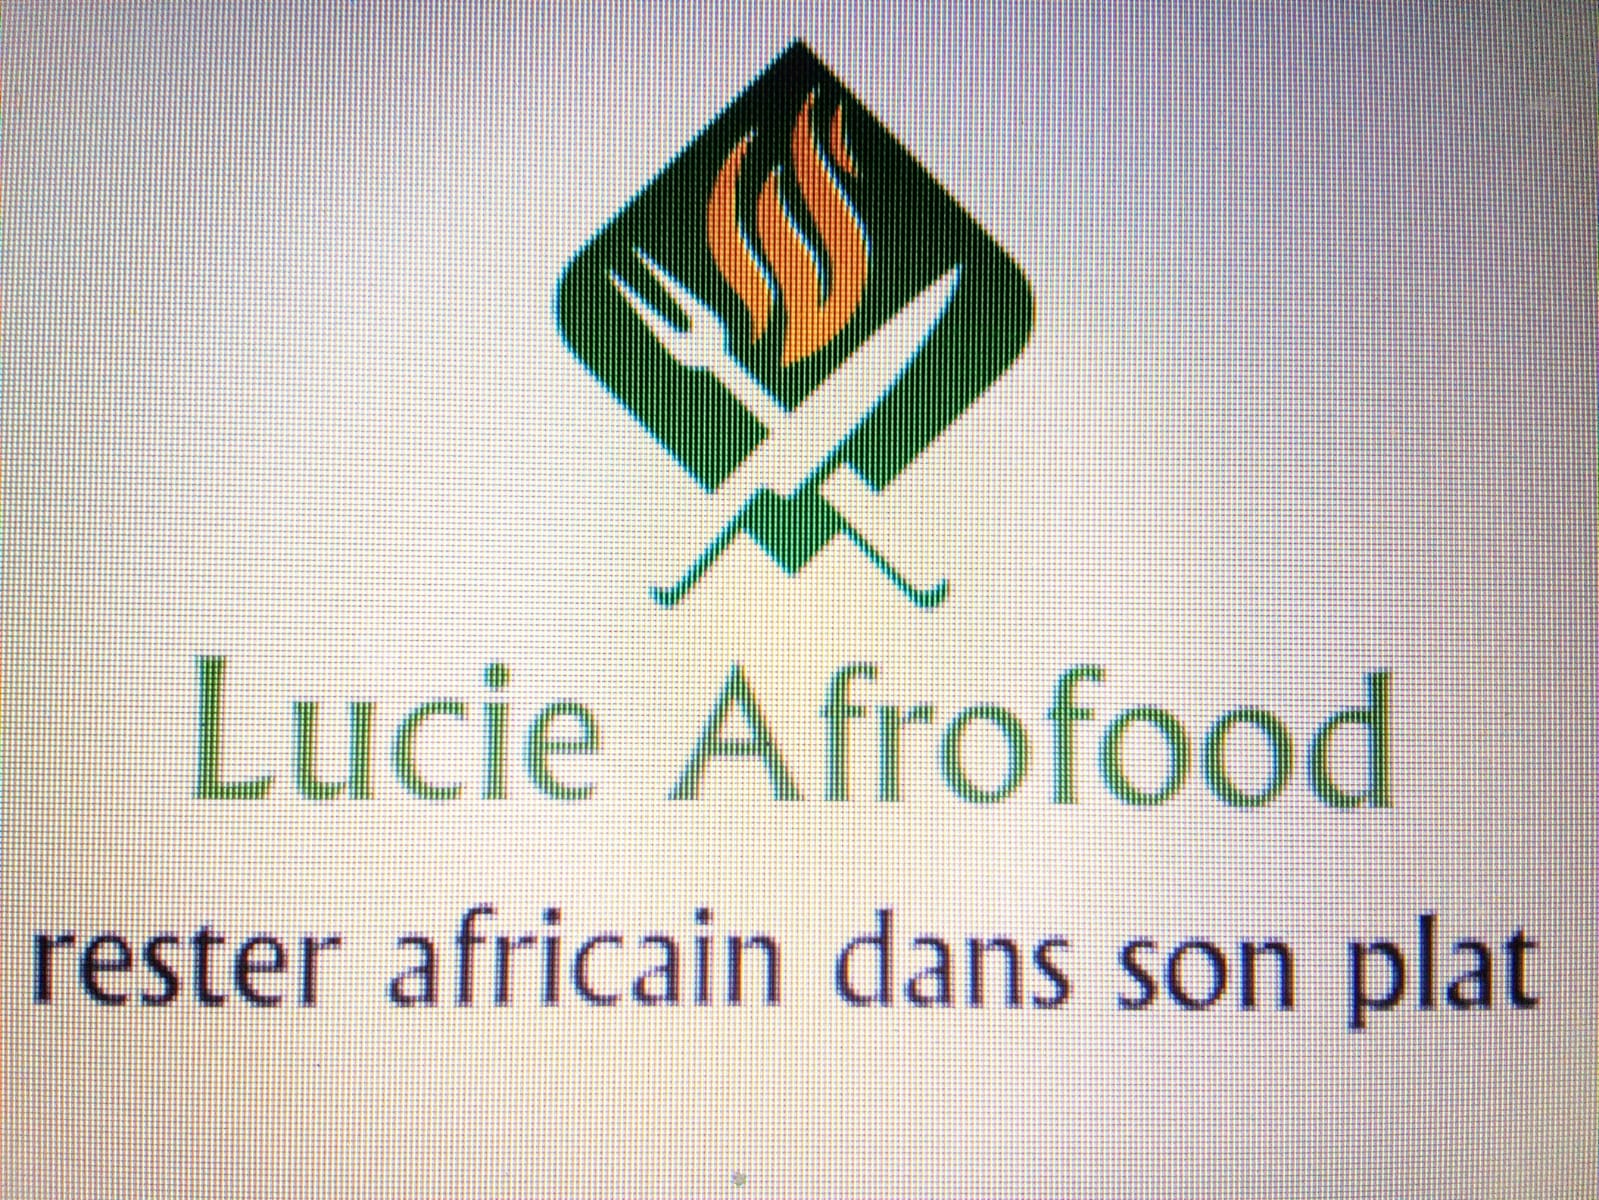 Lucie Afrofood